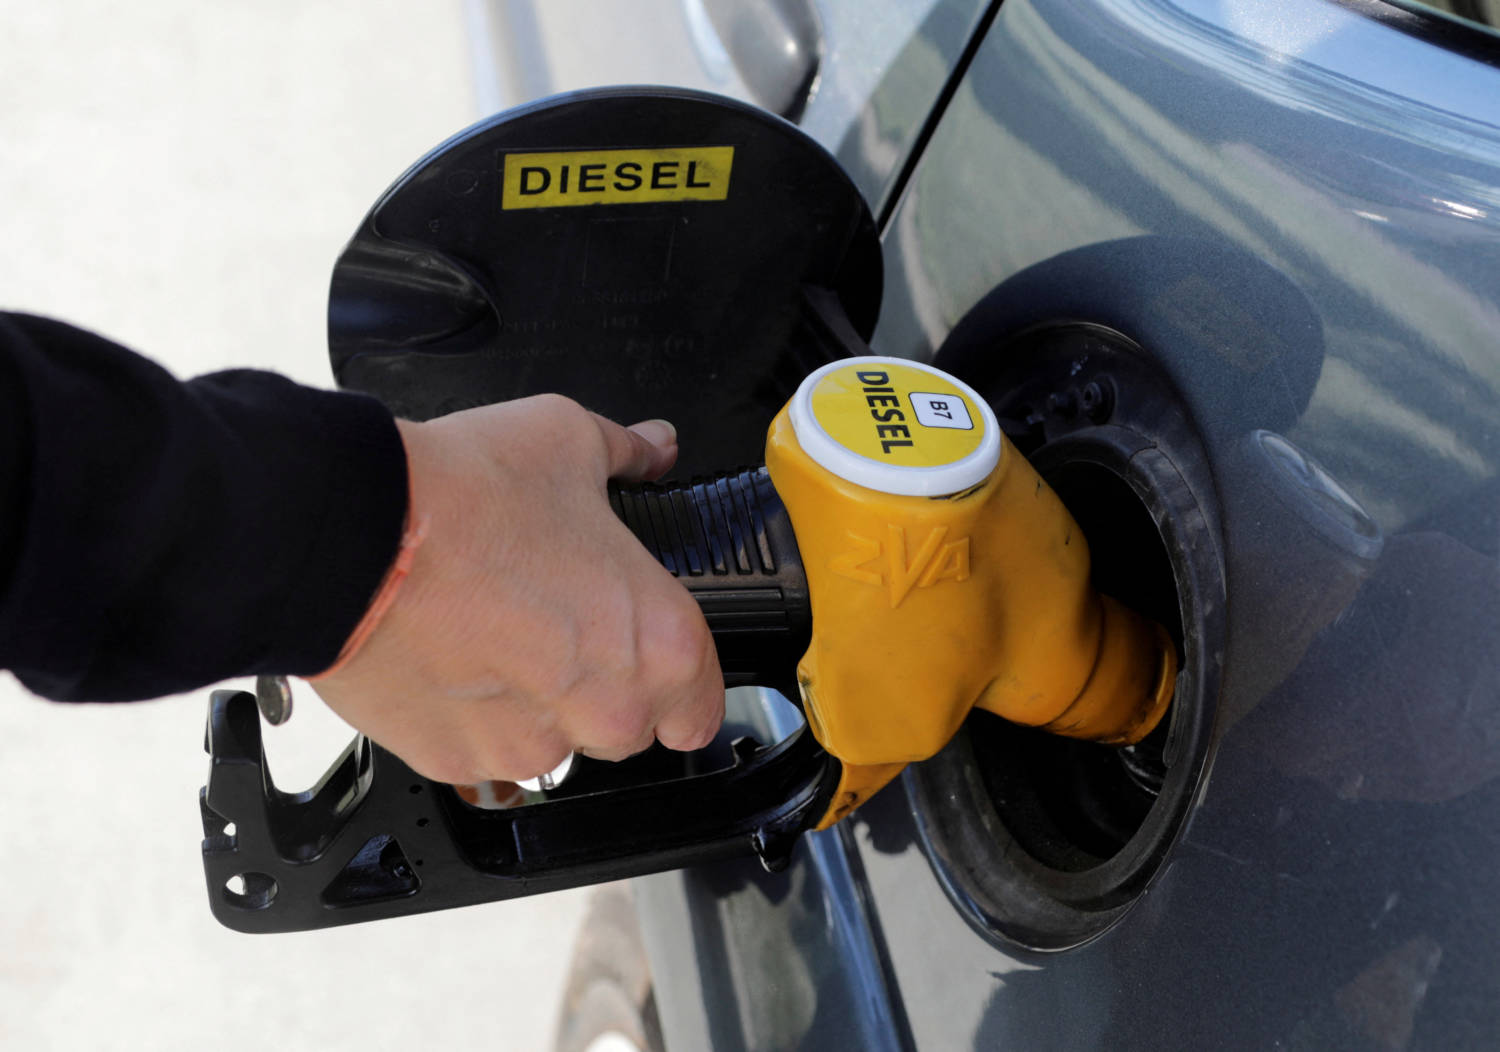 File Photo: A Diesel Fuel Nozzle With New European Labels To Standardise Gas Pumps In The Eu Zone Is Seen At A Petrol Station In Nice